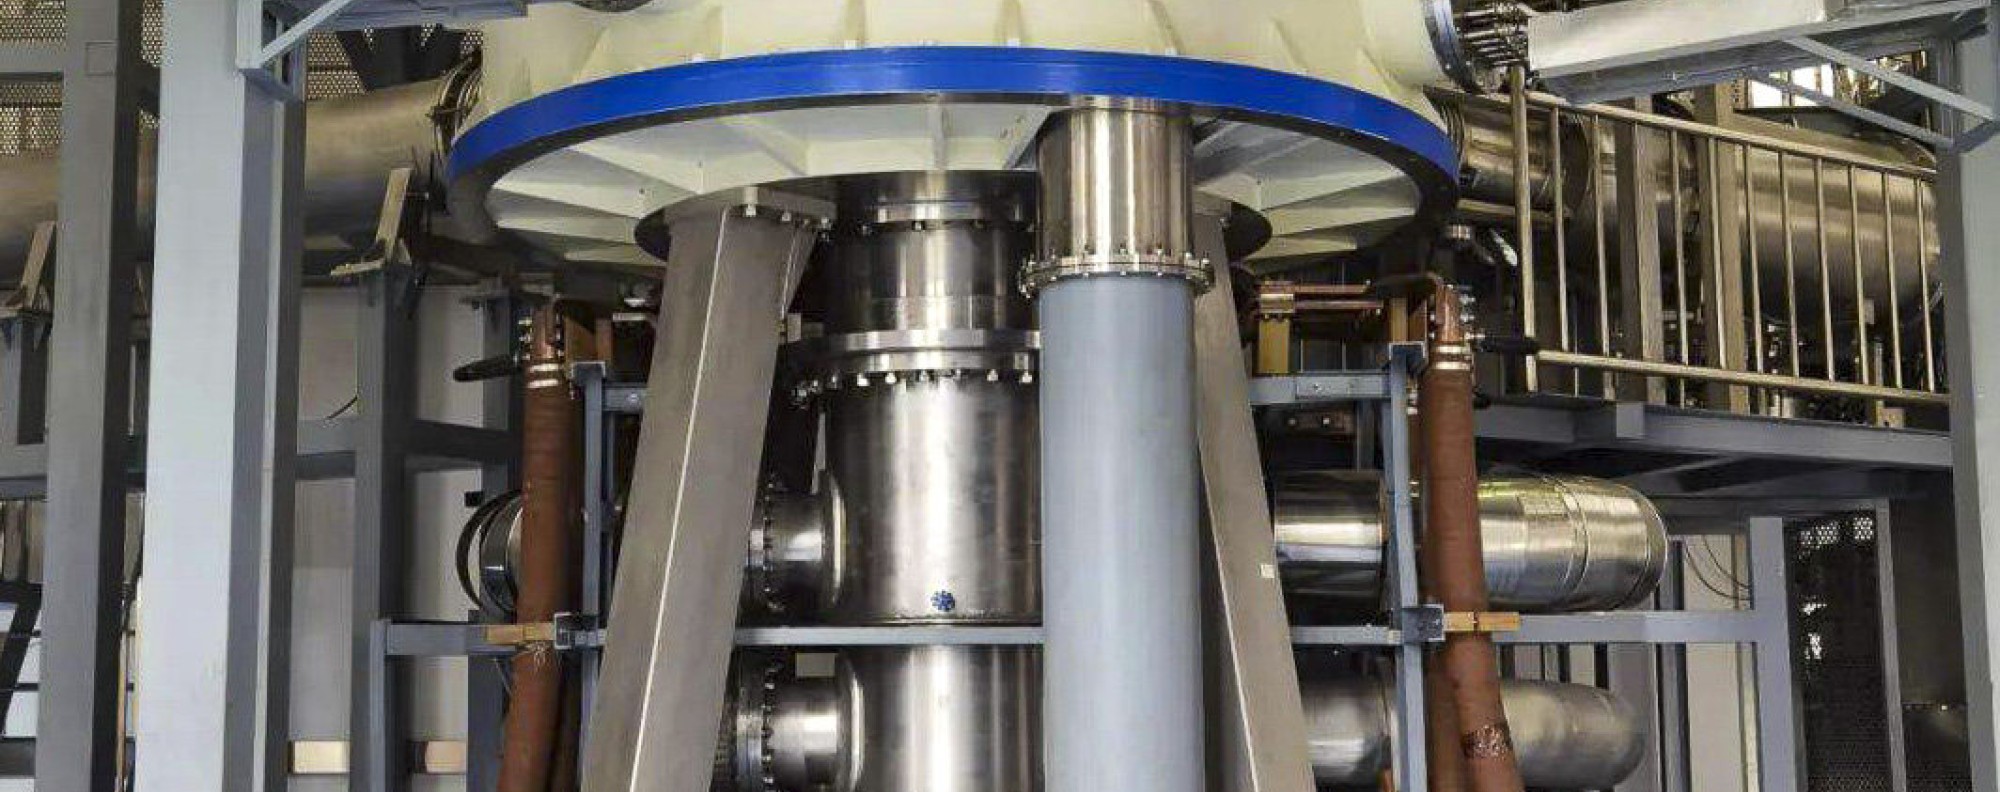 mælk udtale industri China has launched the world's most powerful magnet for scientific research  | South China Morning Post